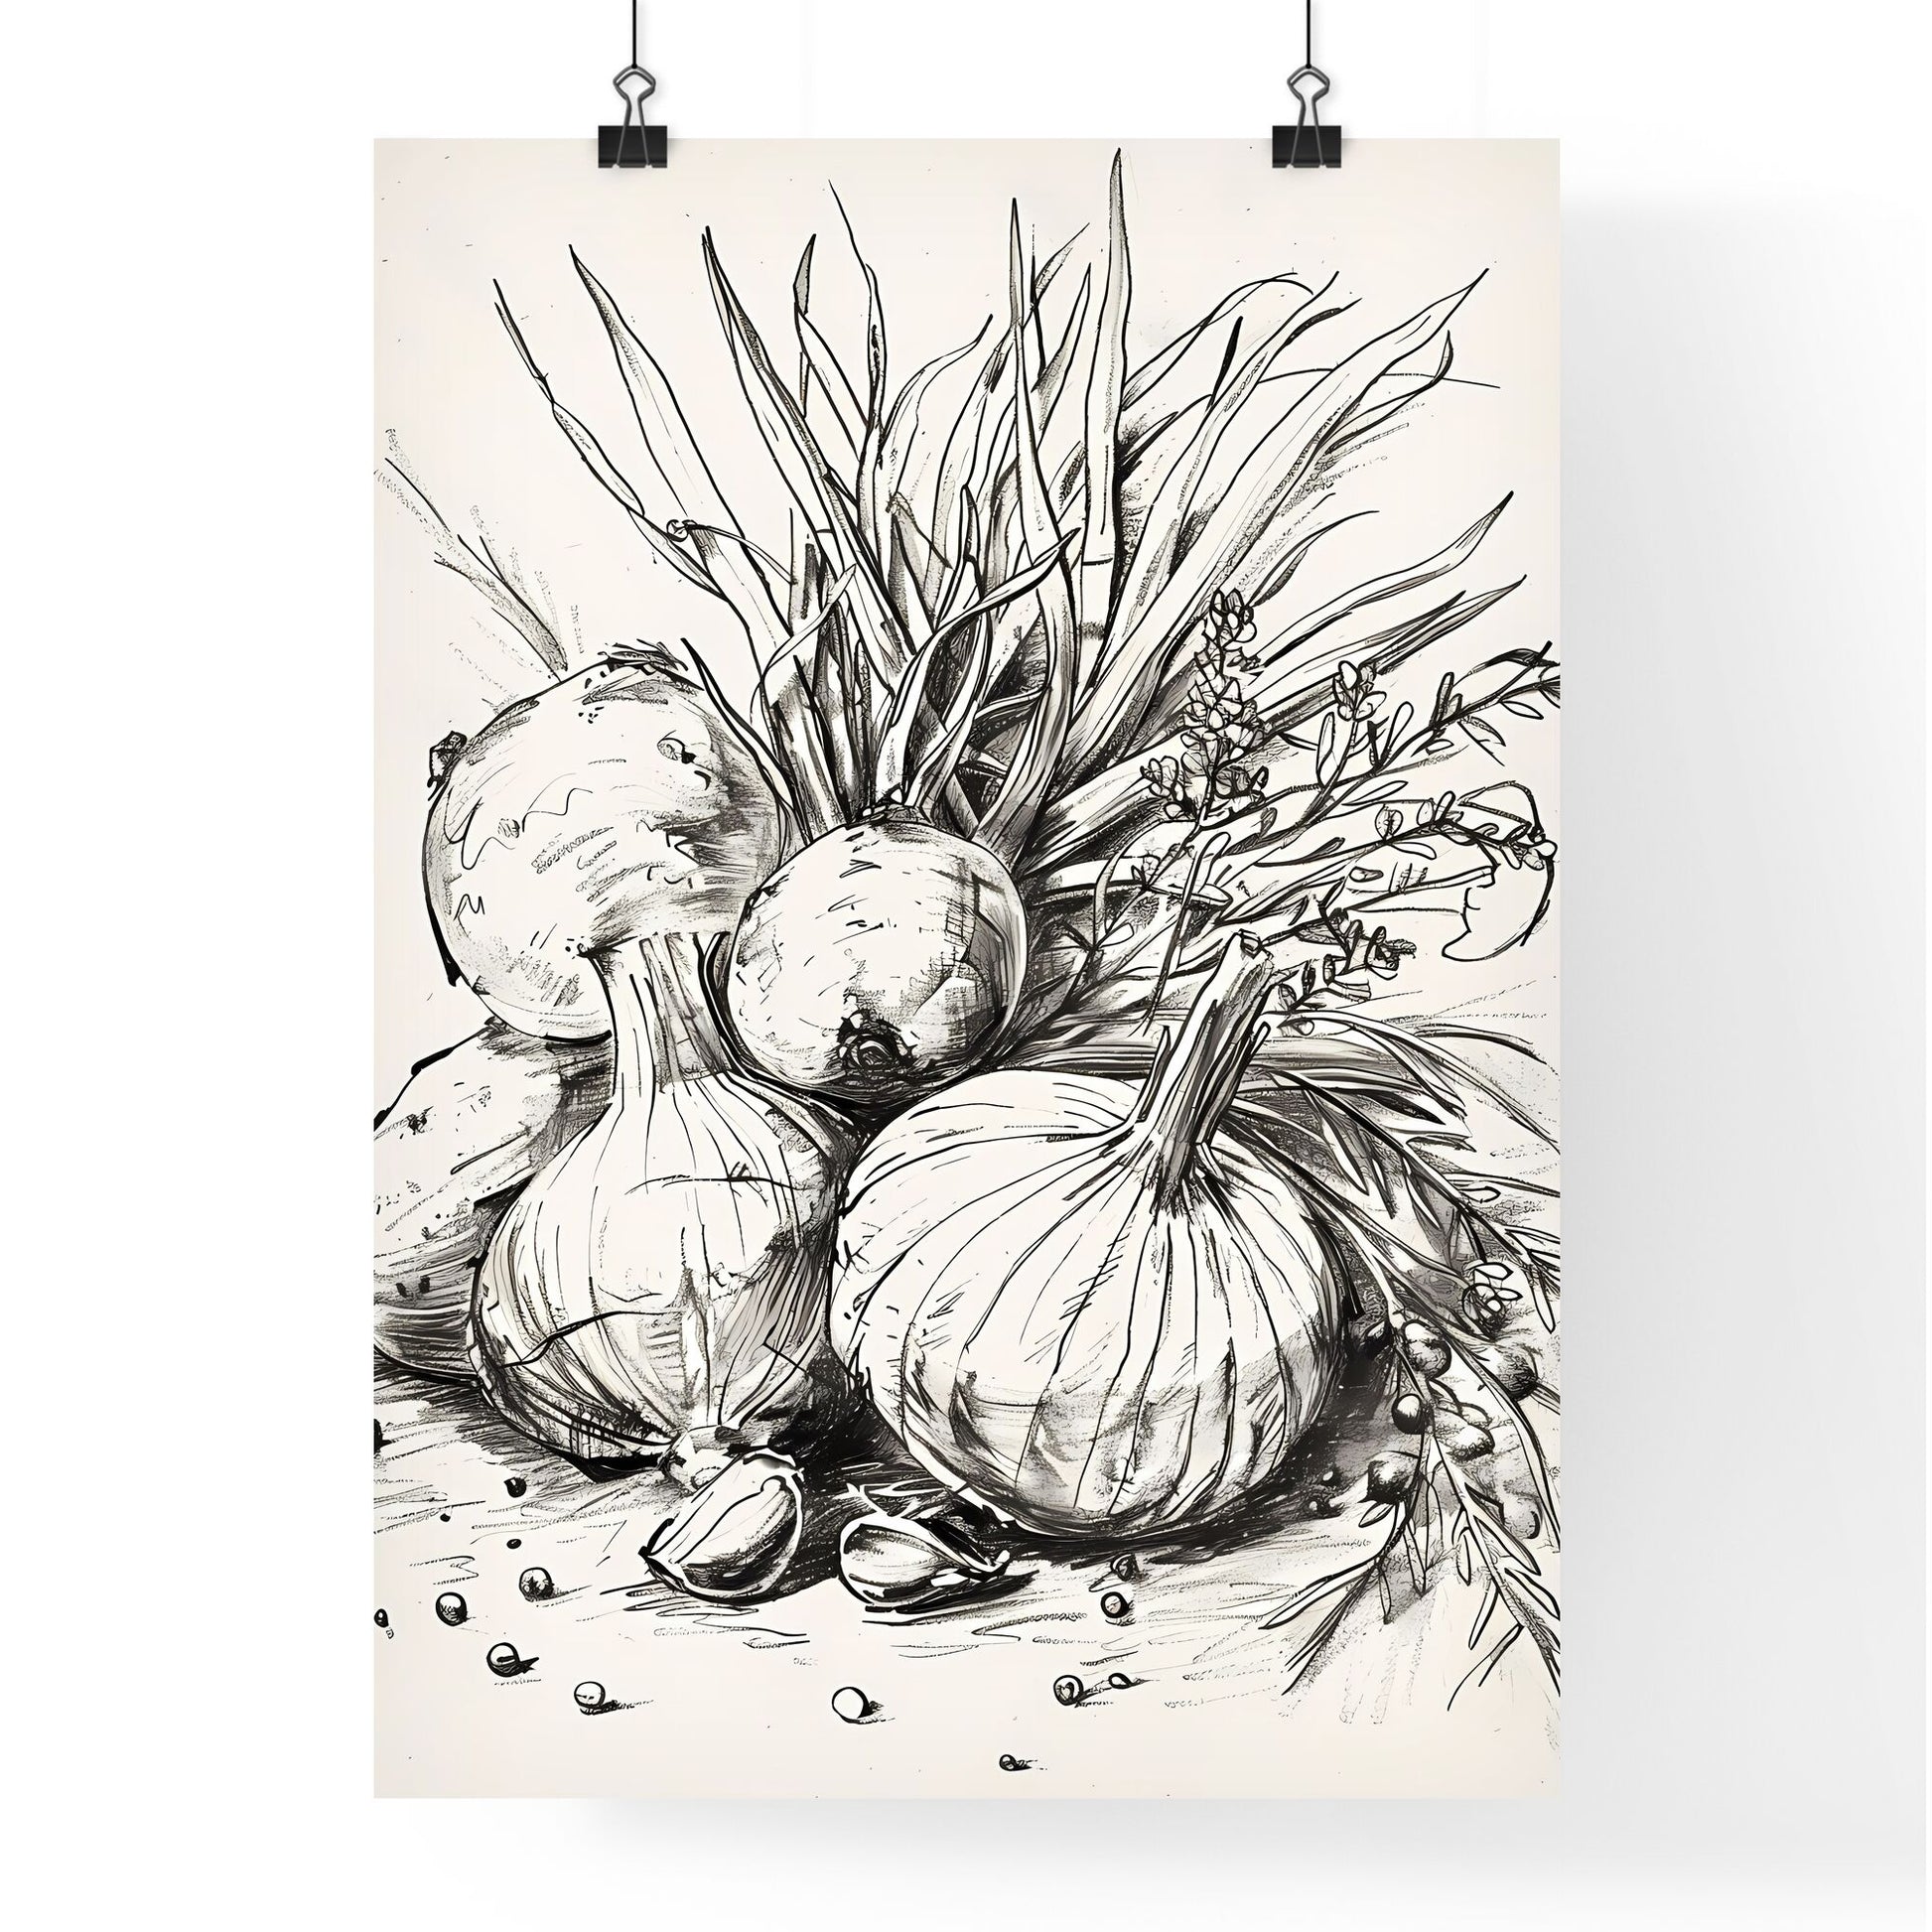 Vibrant, Artistic Kitchen Countertop Sketch: Onions, Garlic, Vegetable Painting Default Title